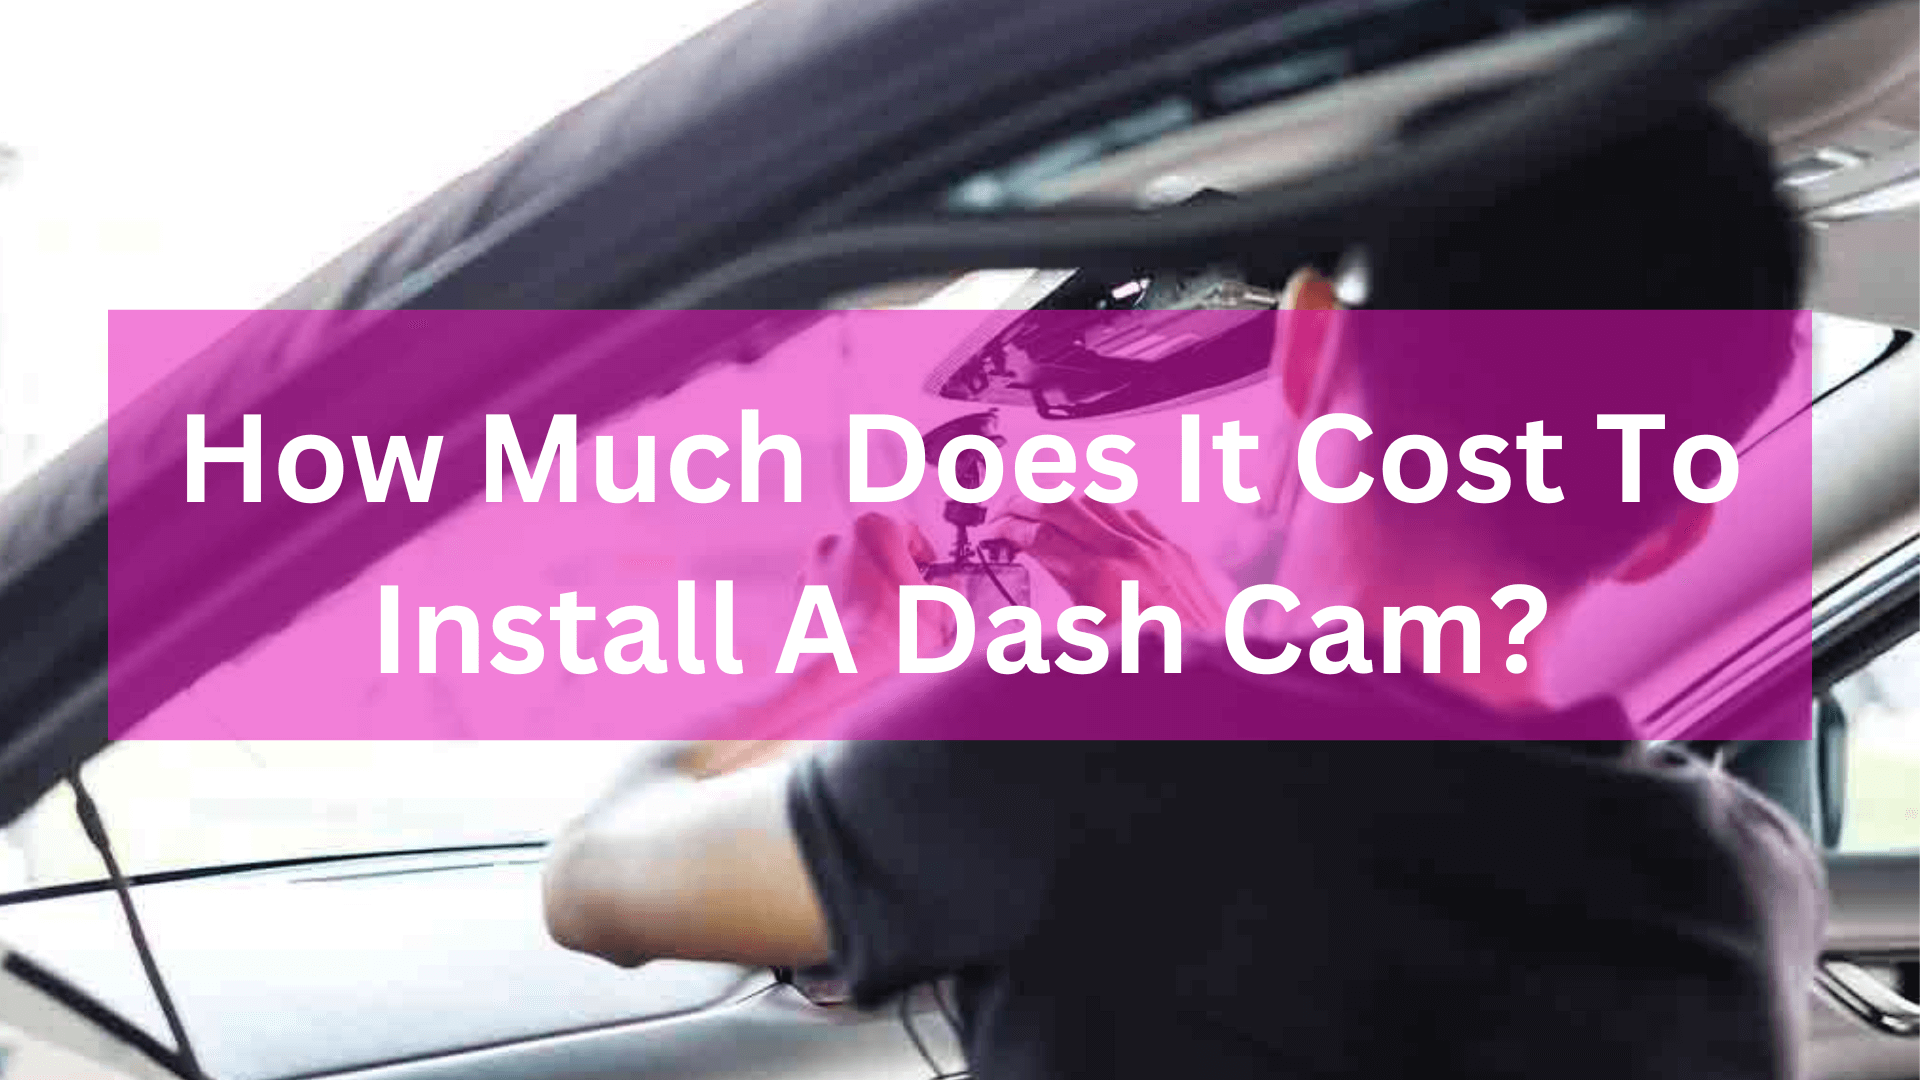 https://dashcamdetails.com/wp-content/uploads/2023/04/How-Much-Does-It-Cost-To-Install-A-Dash-Cam-3.png